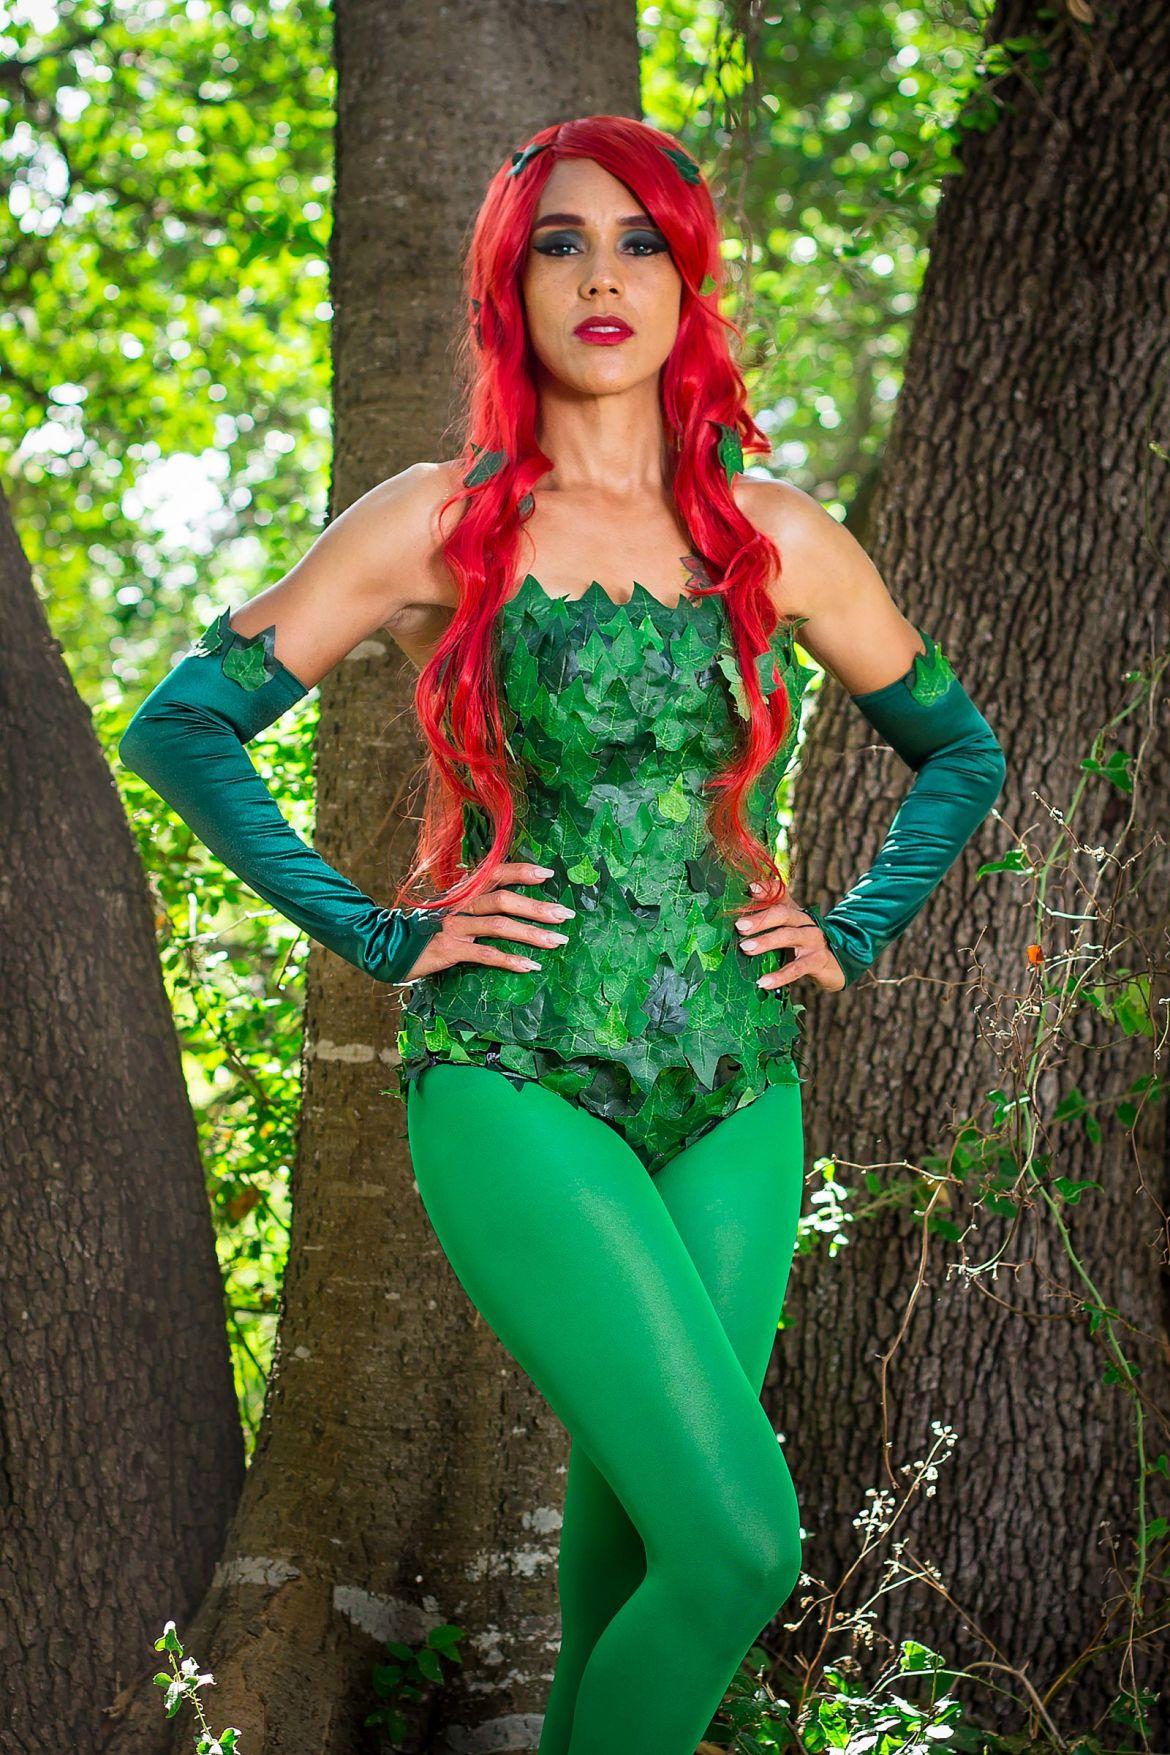 50+ Hot Pictures Of Poison Ivy – One Of The Most Beautiful Batman’s Villain 39